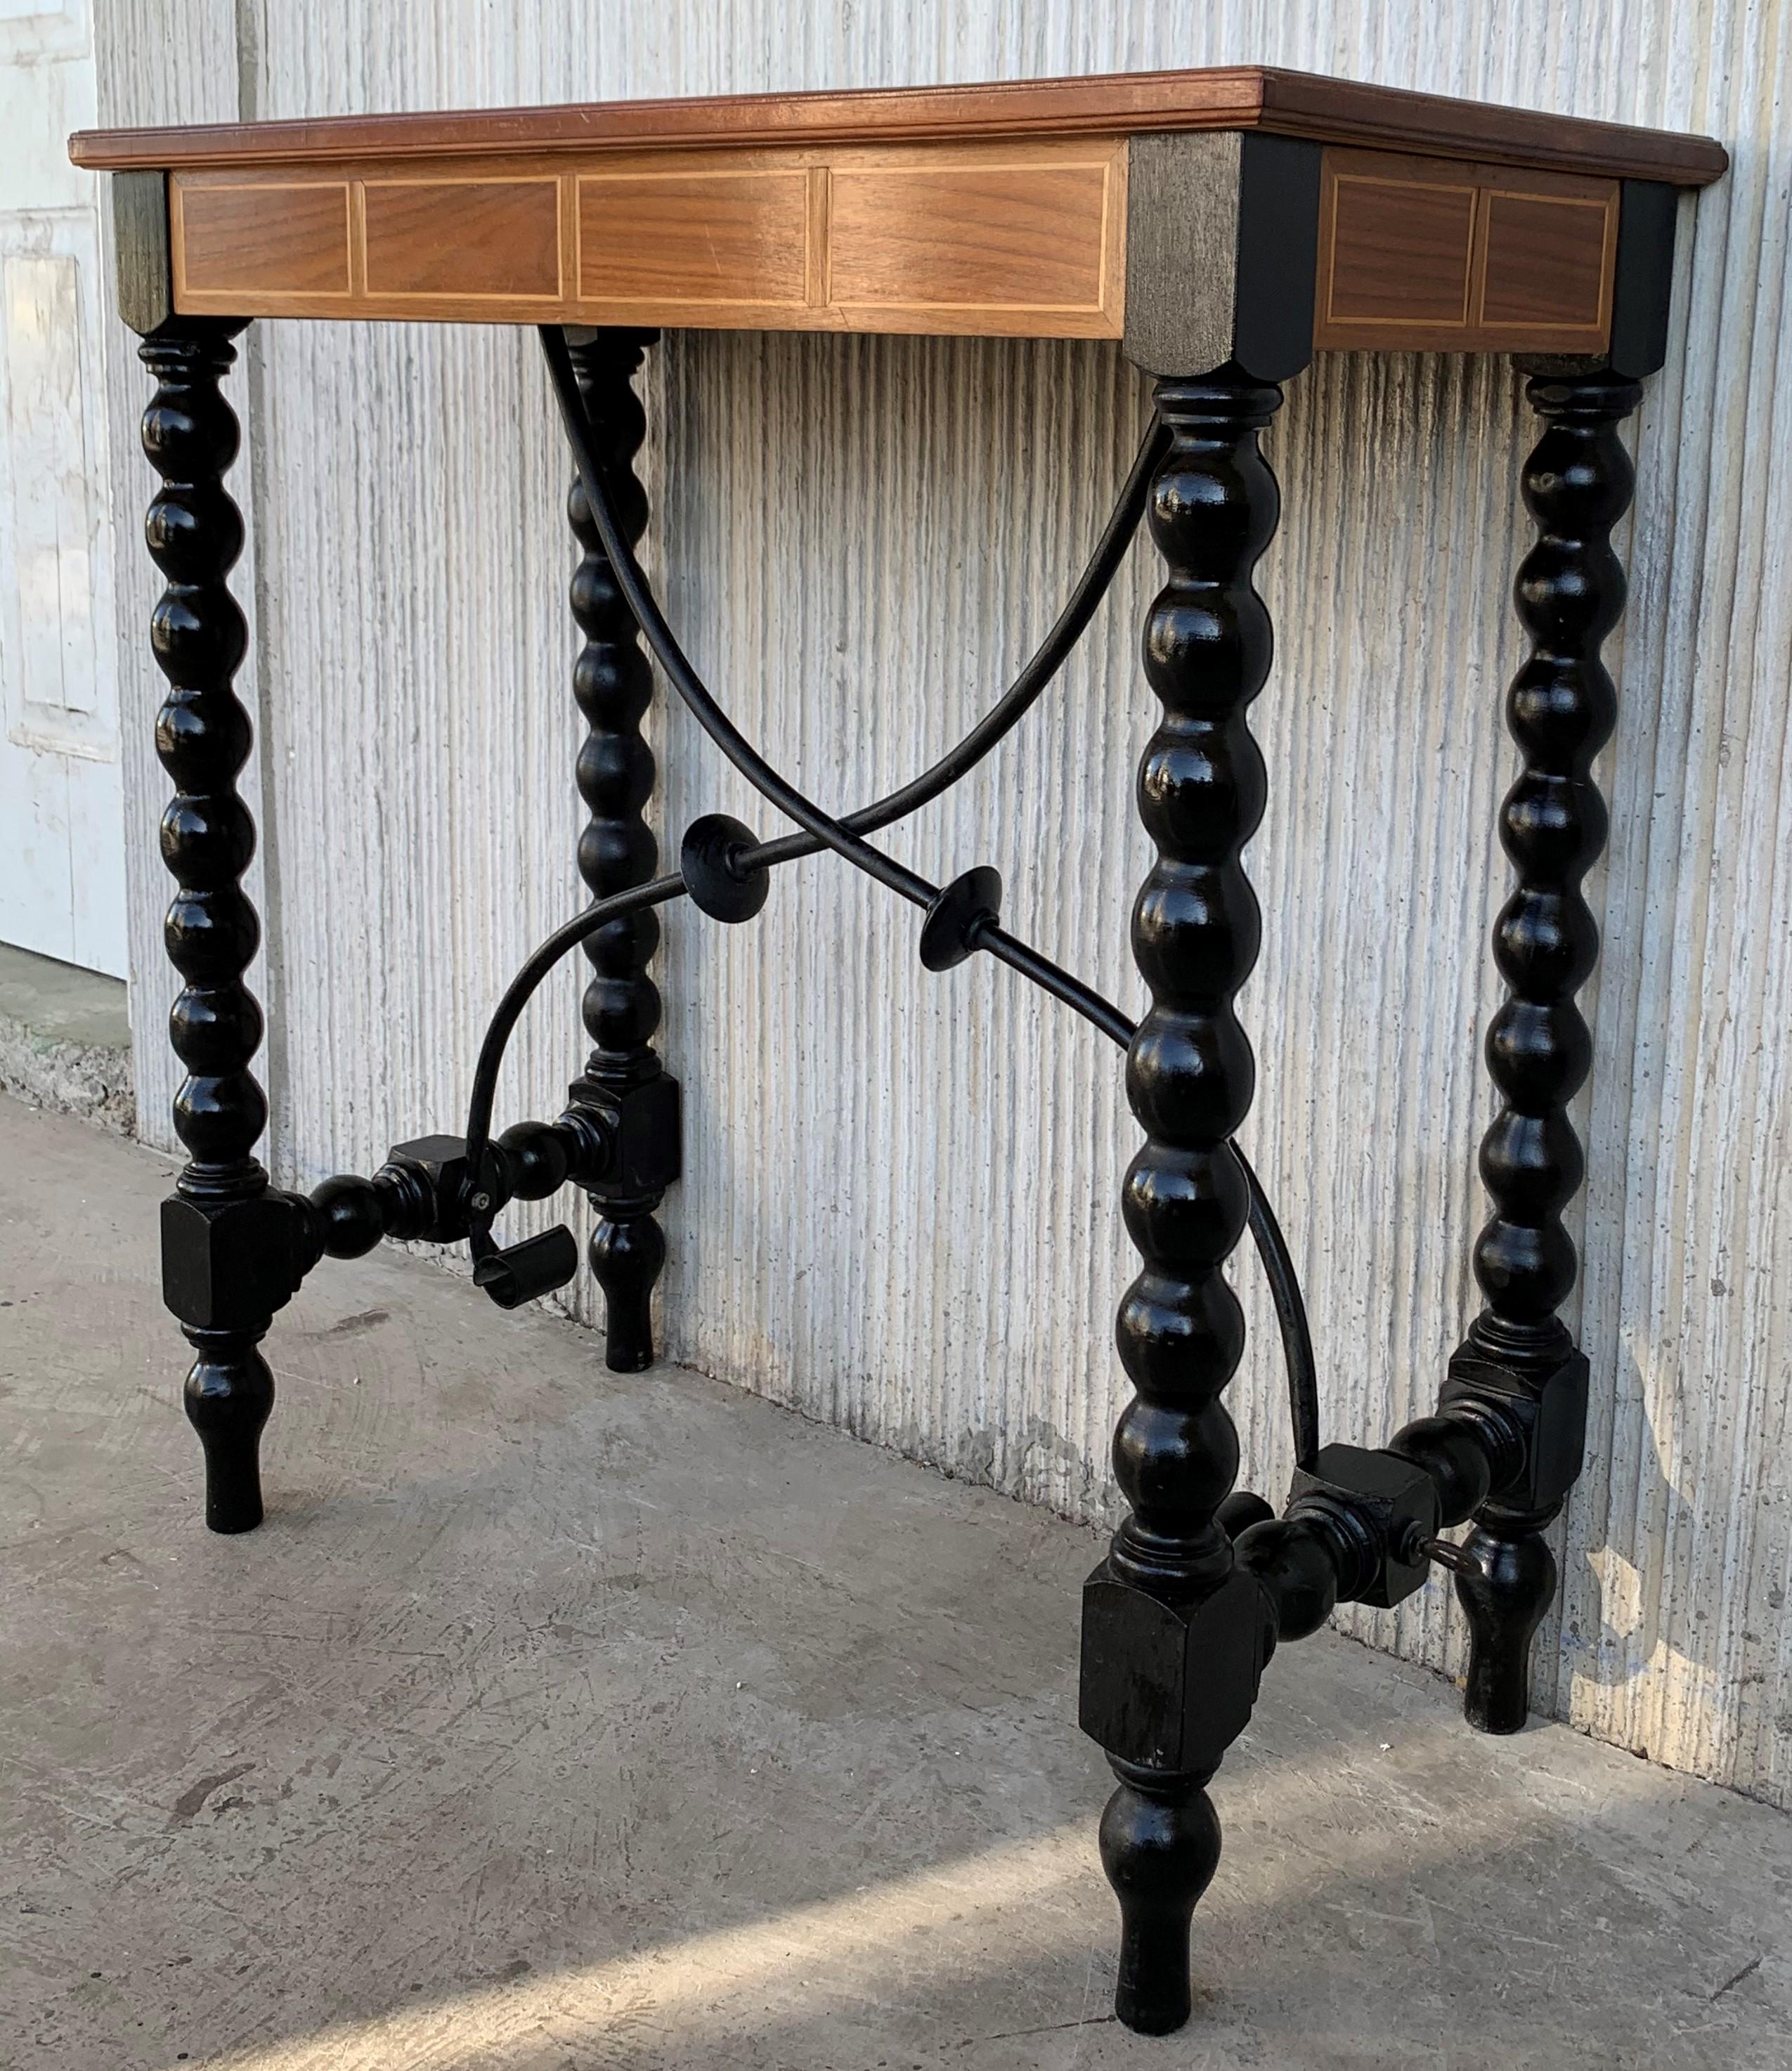 18th century Spanish console table with beautiful marquetry top with geometrical figures and black ebonized lentil legs. The legs are joined by an iron stretcher with rare disk shaped finished.